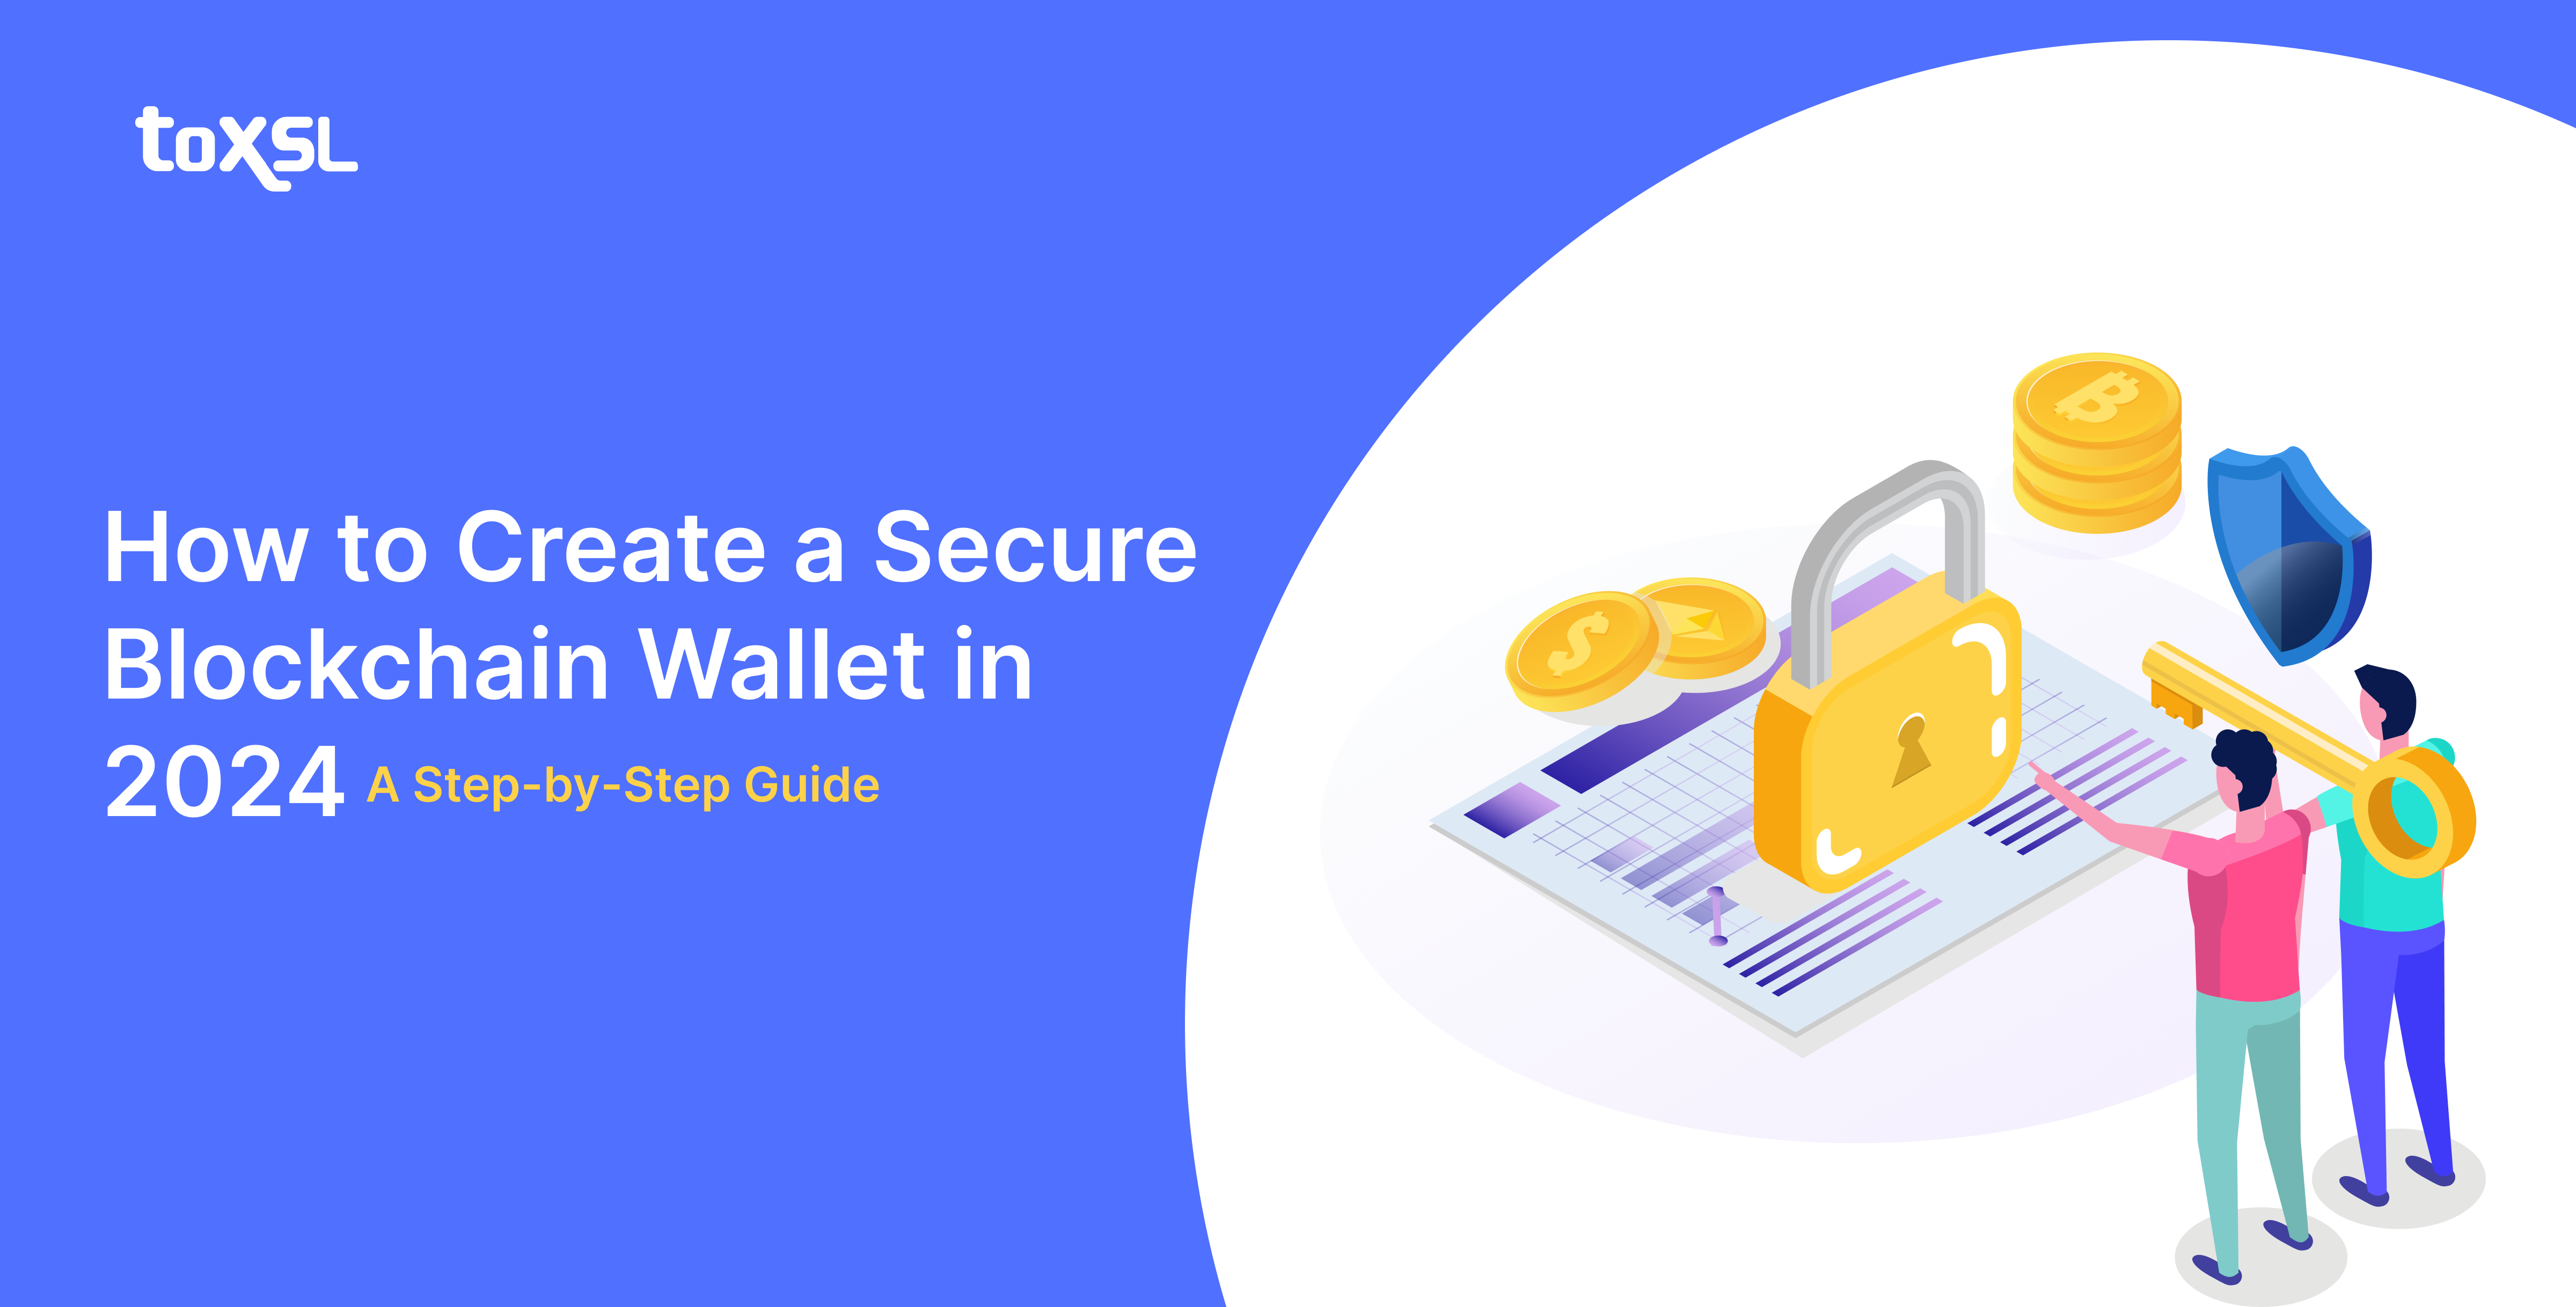 How to Create a Secure Blockchain Wallet in 2024: A Step-by-Step Guide